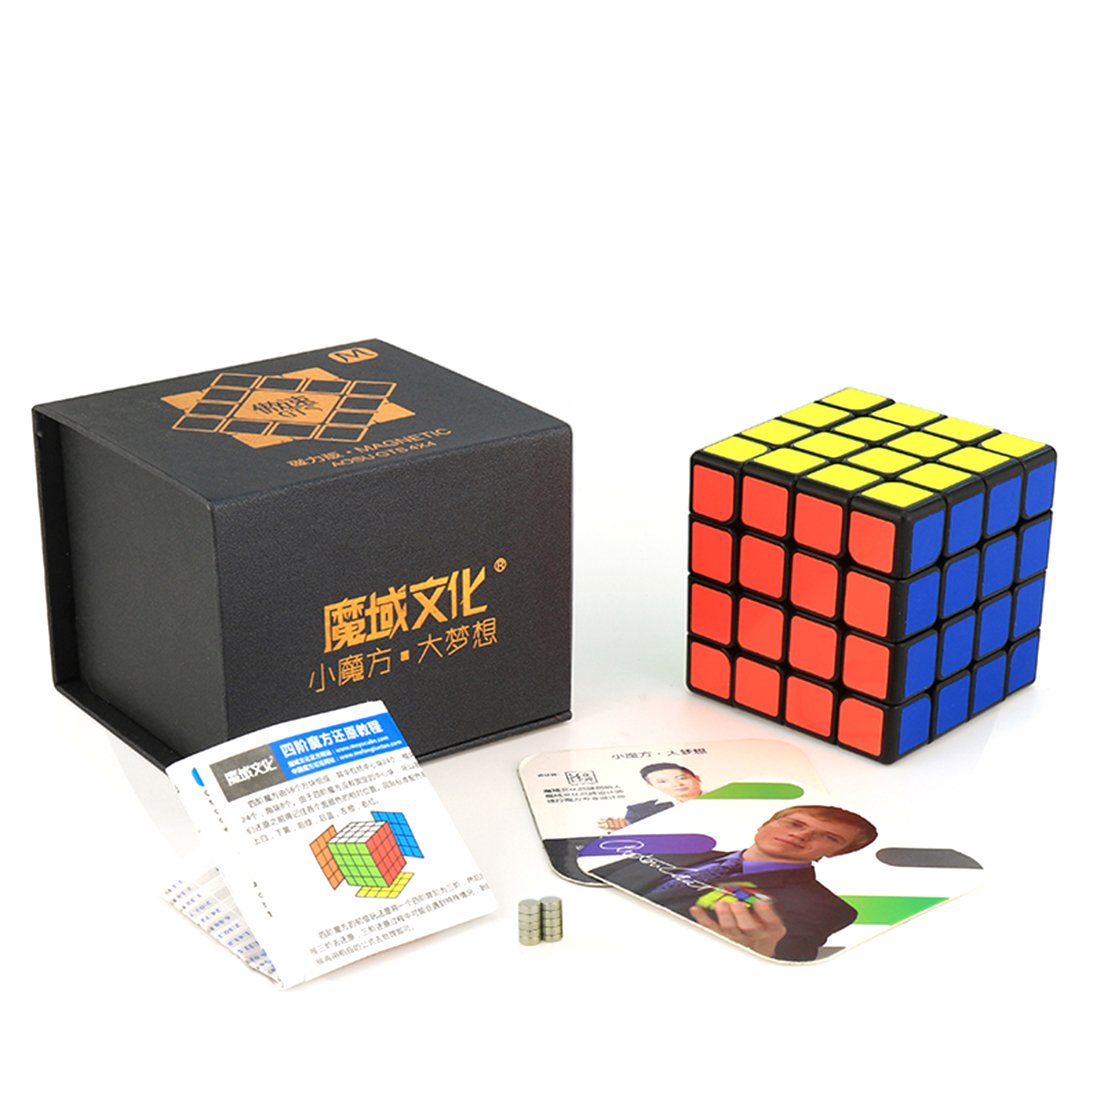 YJ8259 MoYu Aosu GTS M 4x4x4 Magic Cube for Competition - Magnetic Version